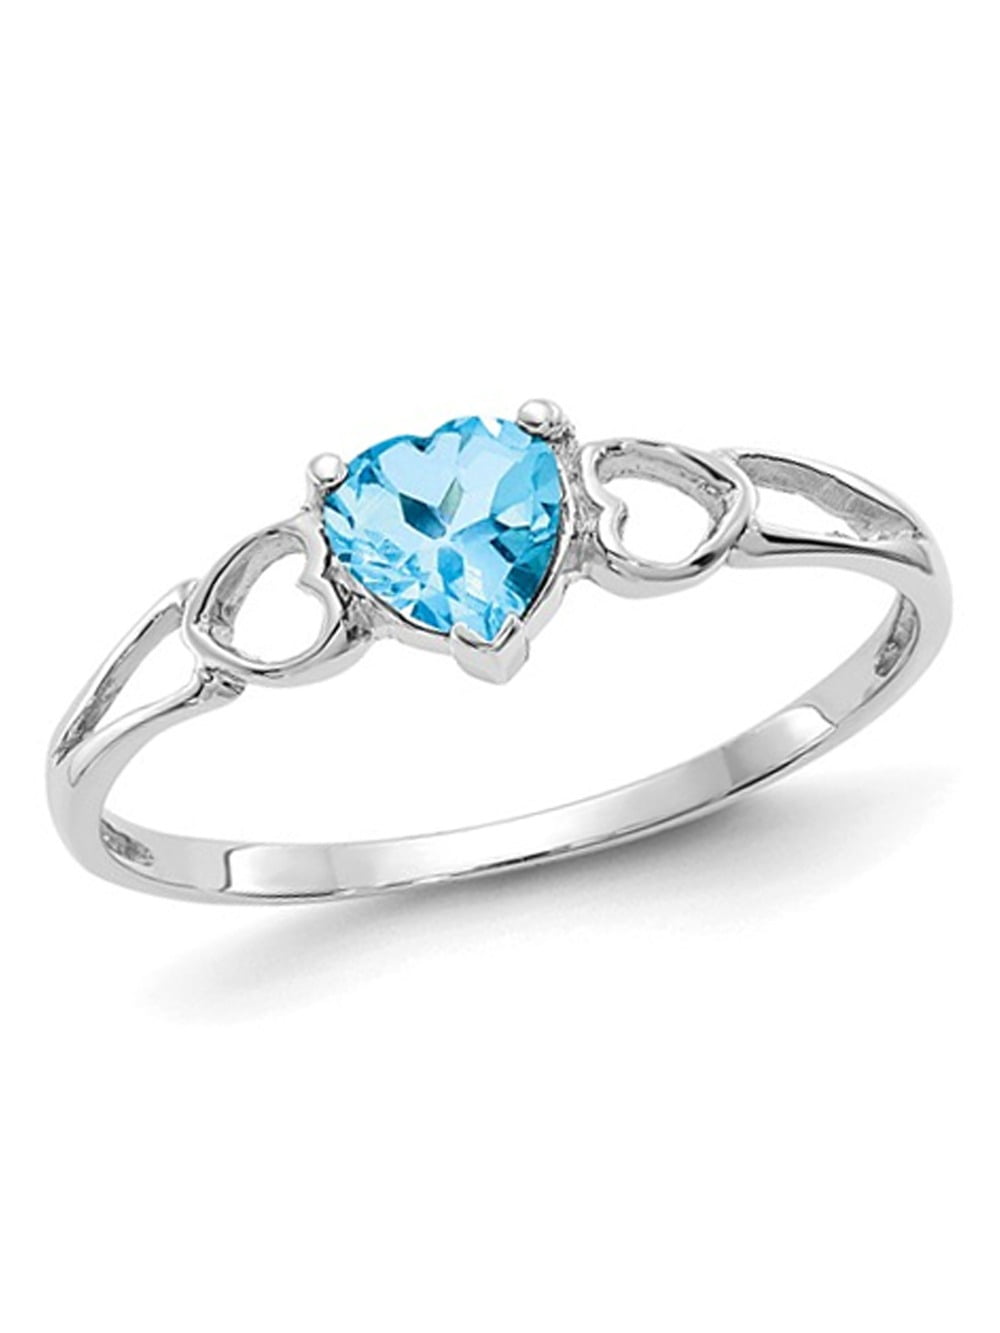 Gem And Harmony - 1/2 Carat (Ctw) Natural Swiss Blue Topaz Heart Ring ...